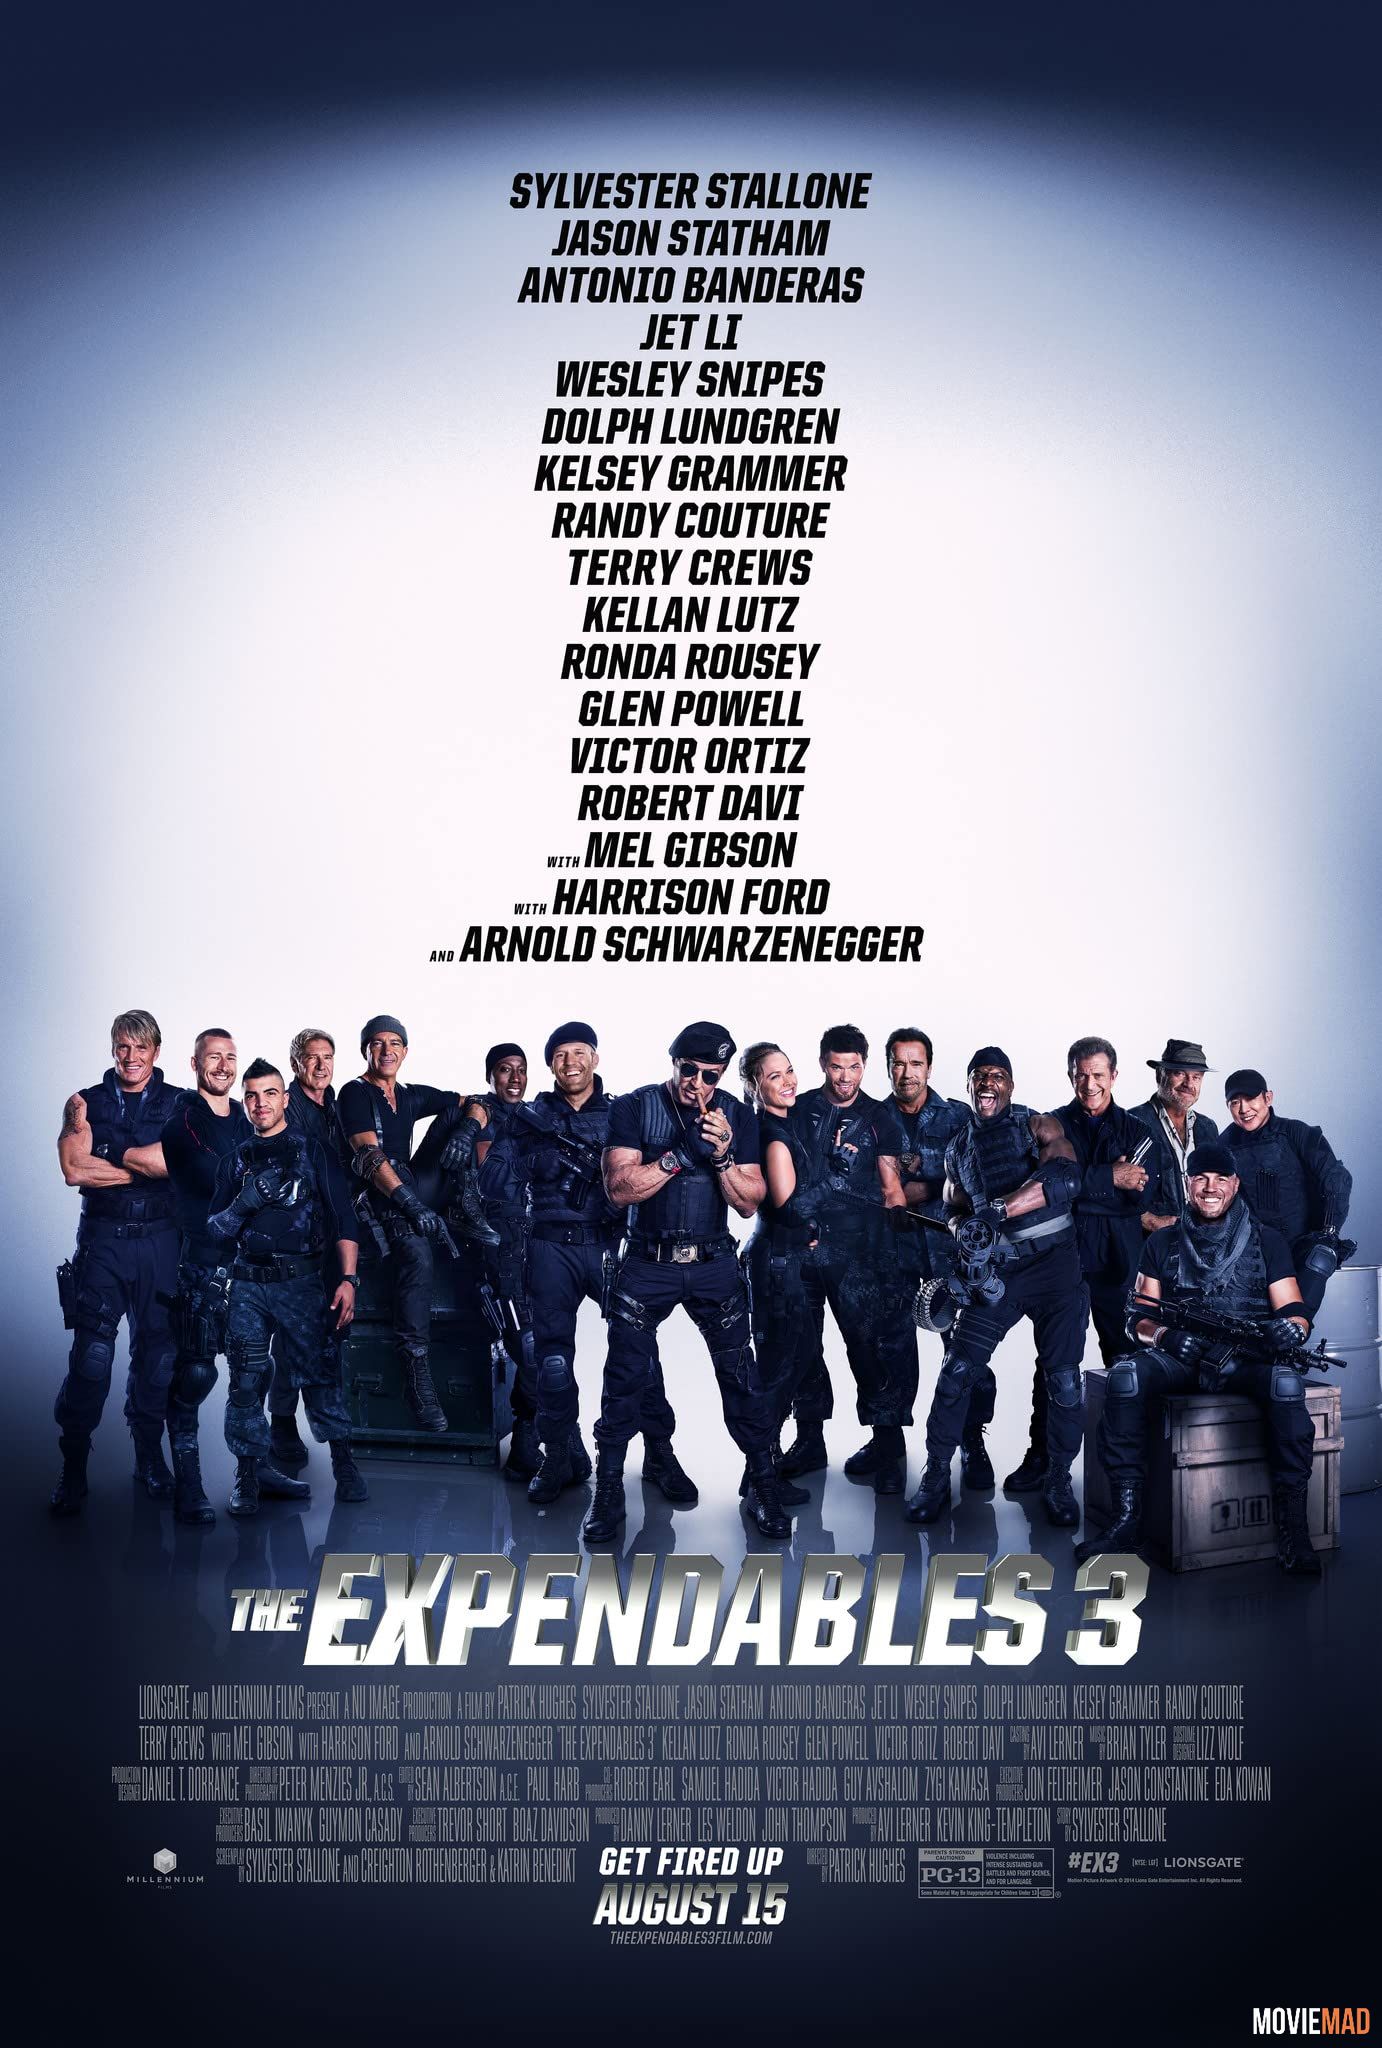 The Expendables 3 (2014) Hindi Dubbed ORG BluRay Full Movie 1080p 720p 480p